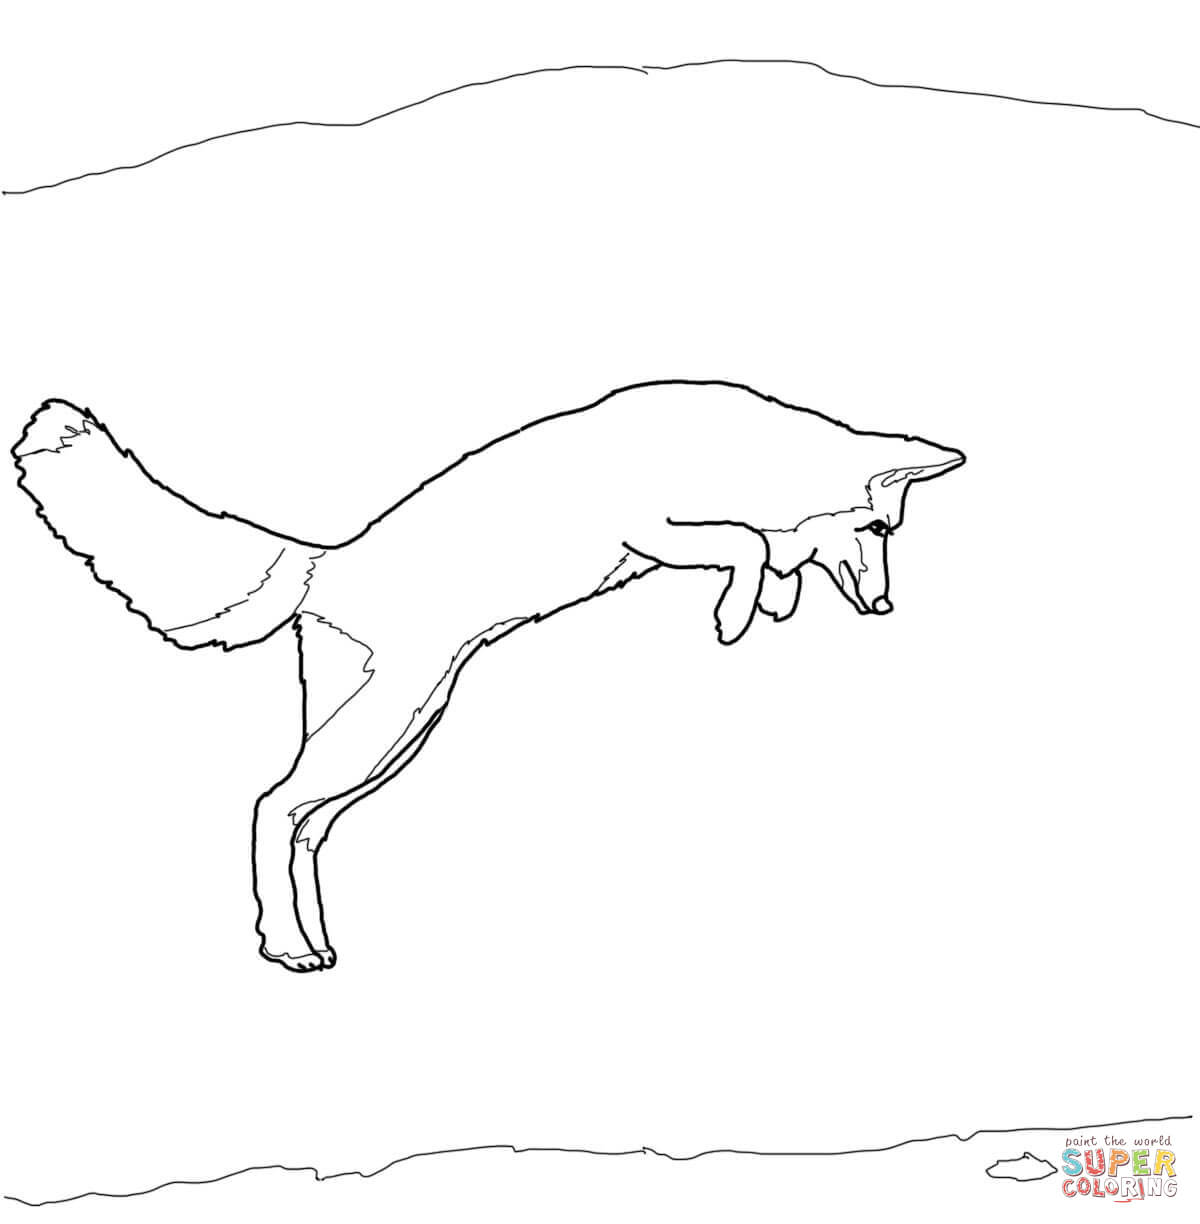 Arctic fox jump coloring page free printable coloring pages